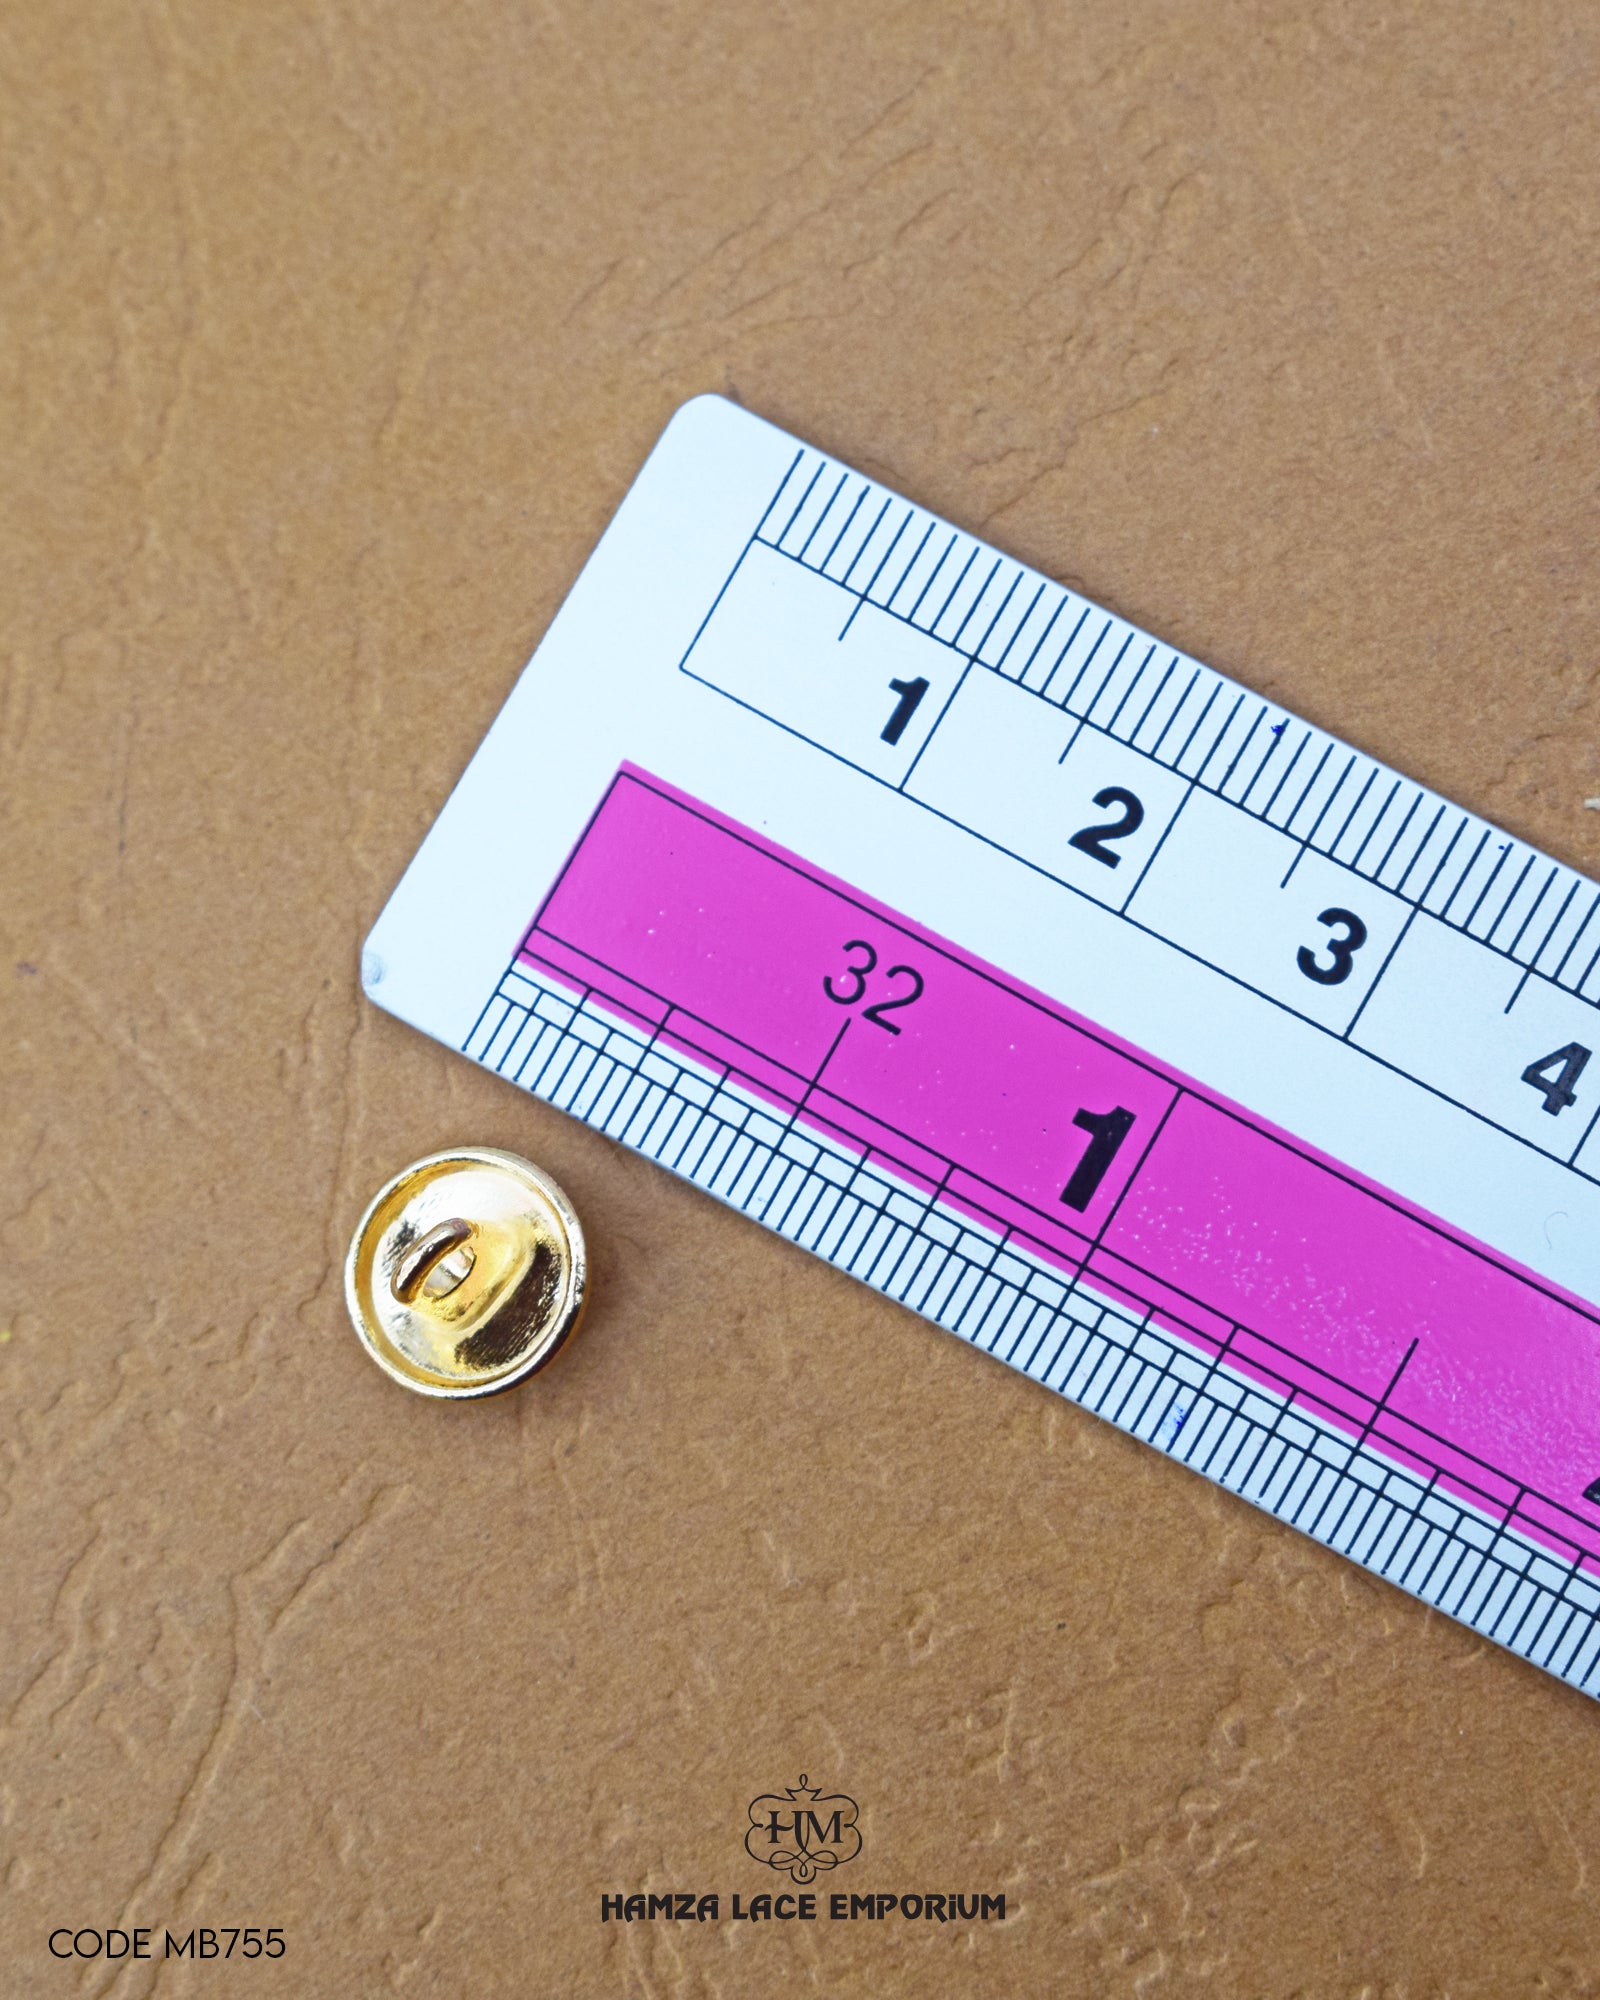 The size of the 'Golden Metal Button MB755' is measured by using a ruler